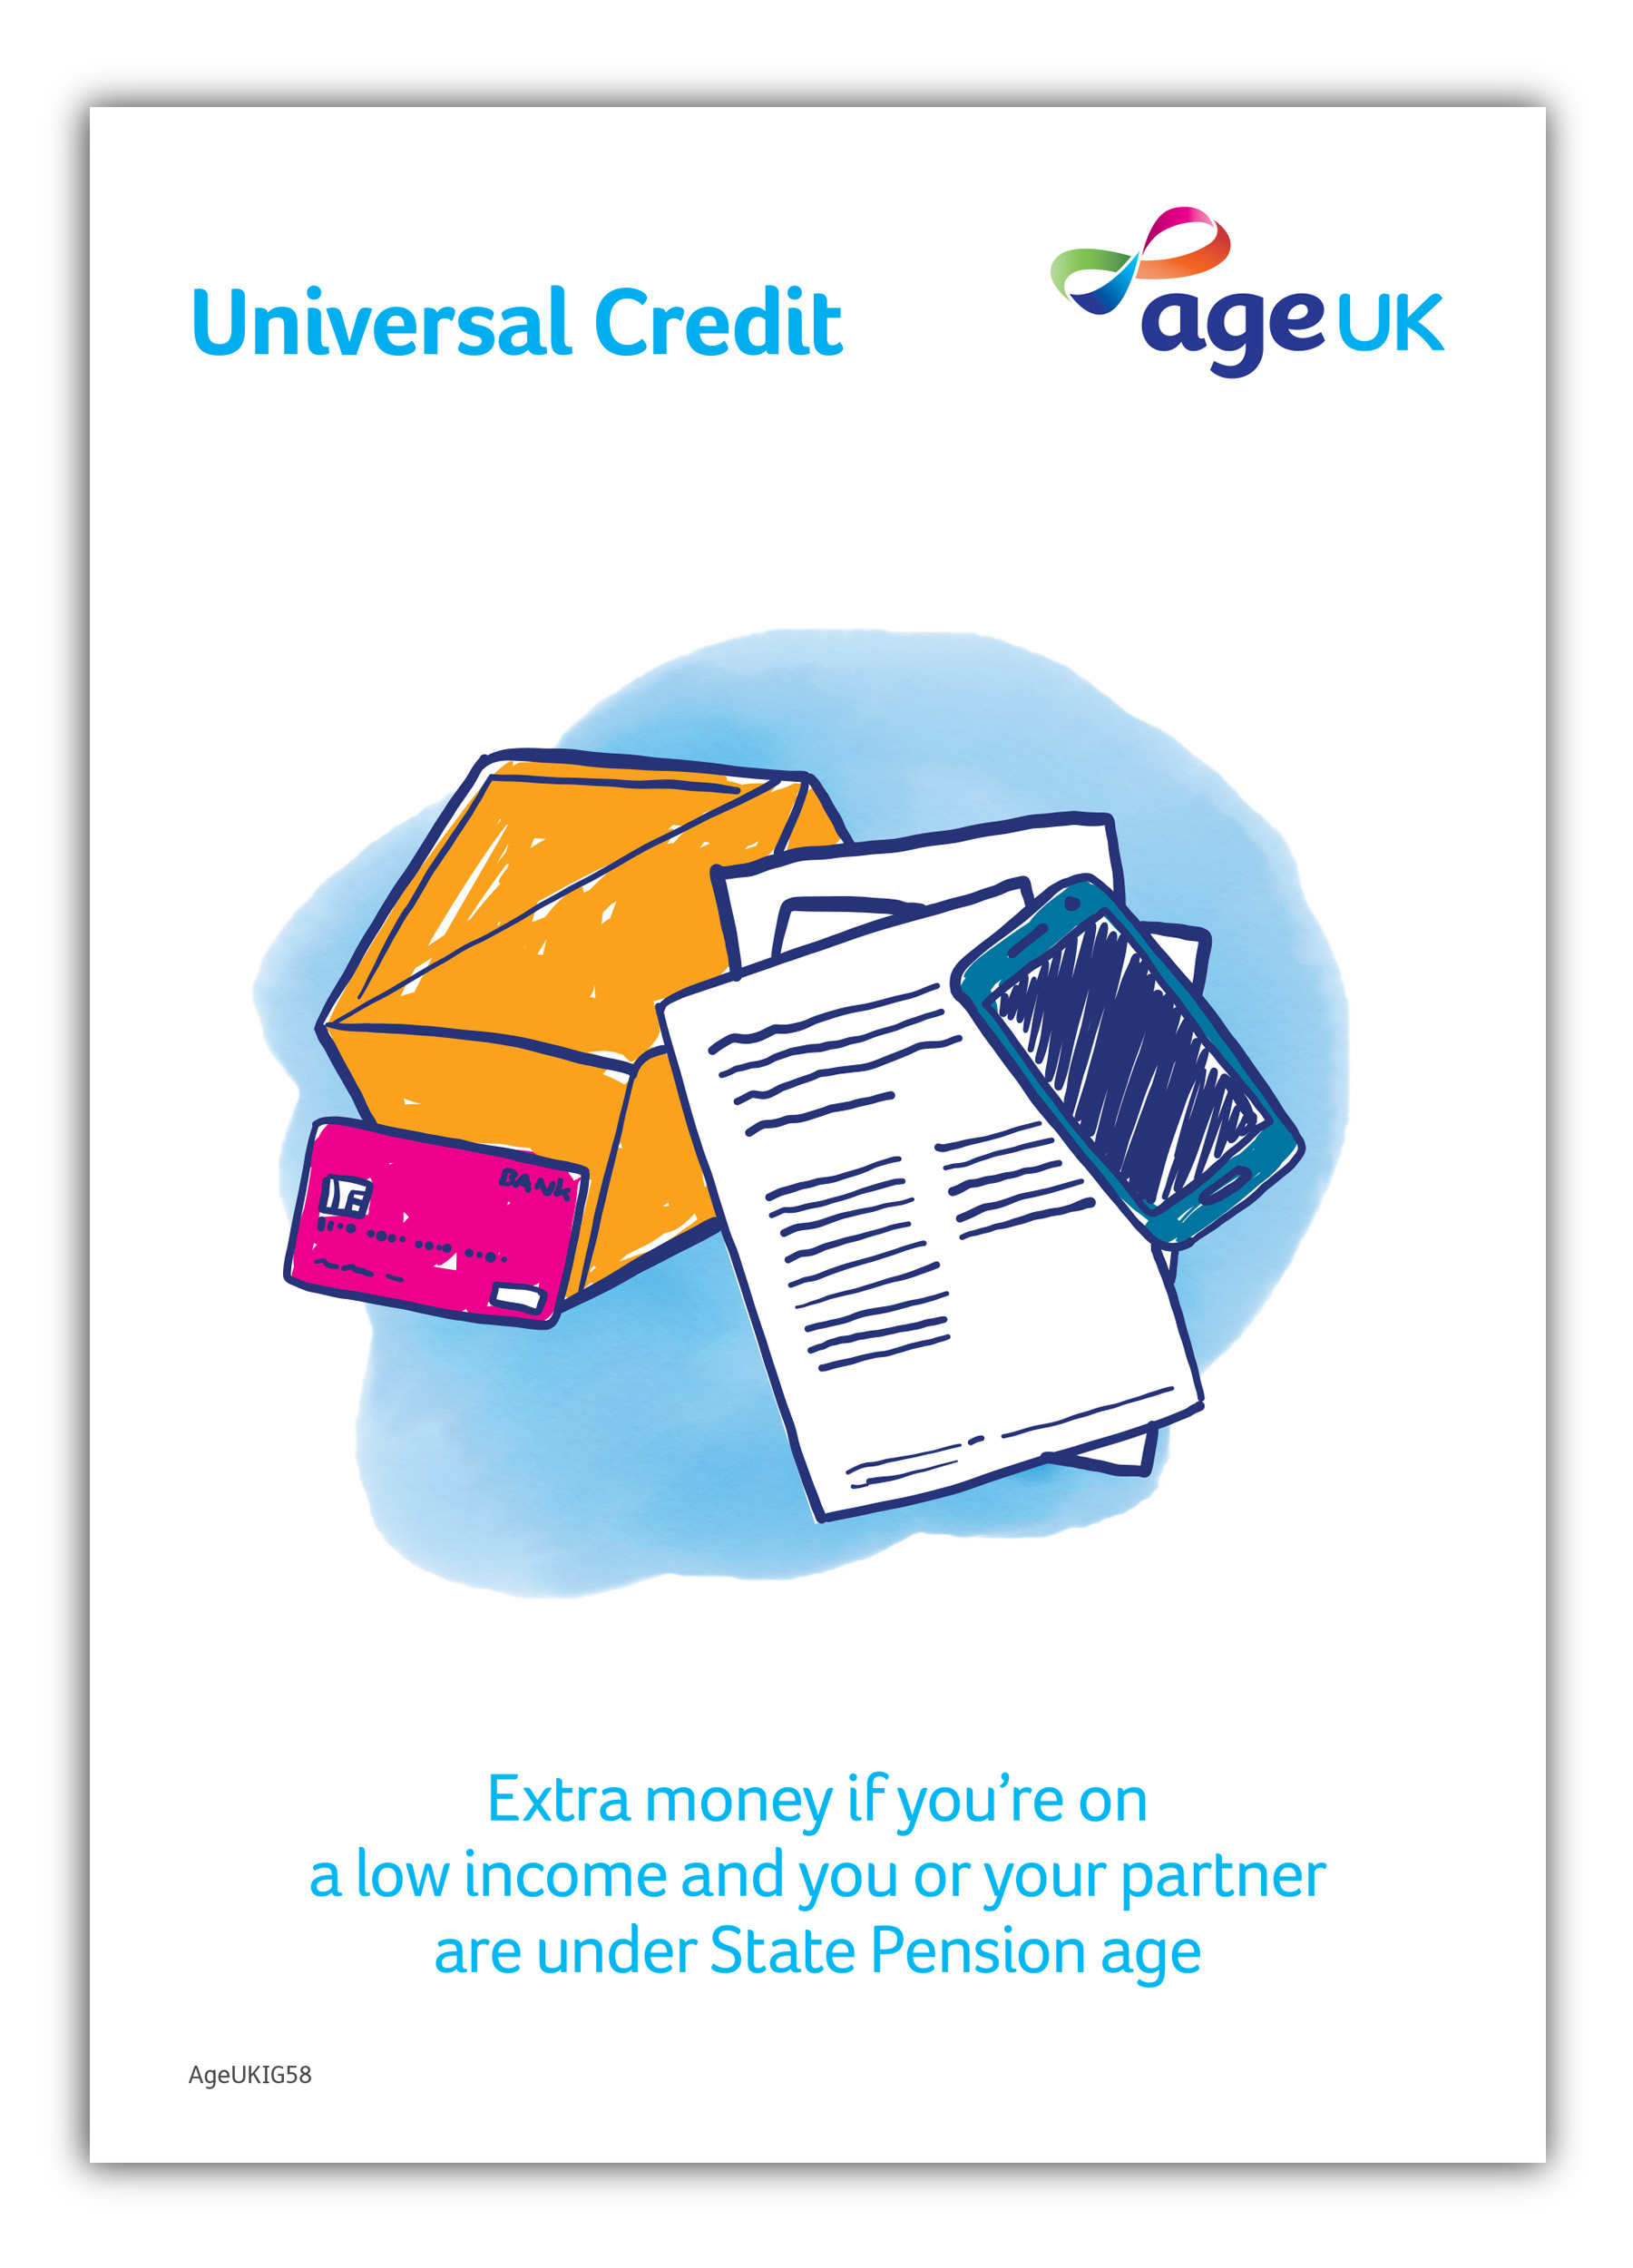 travelling abroad and universal credit